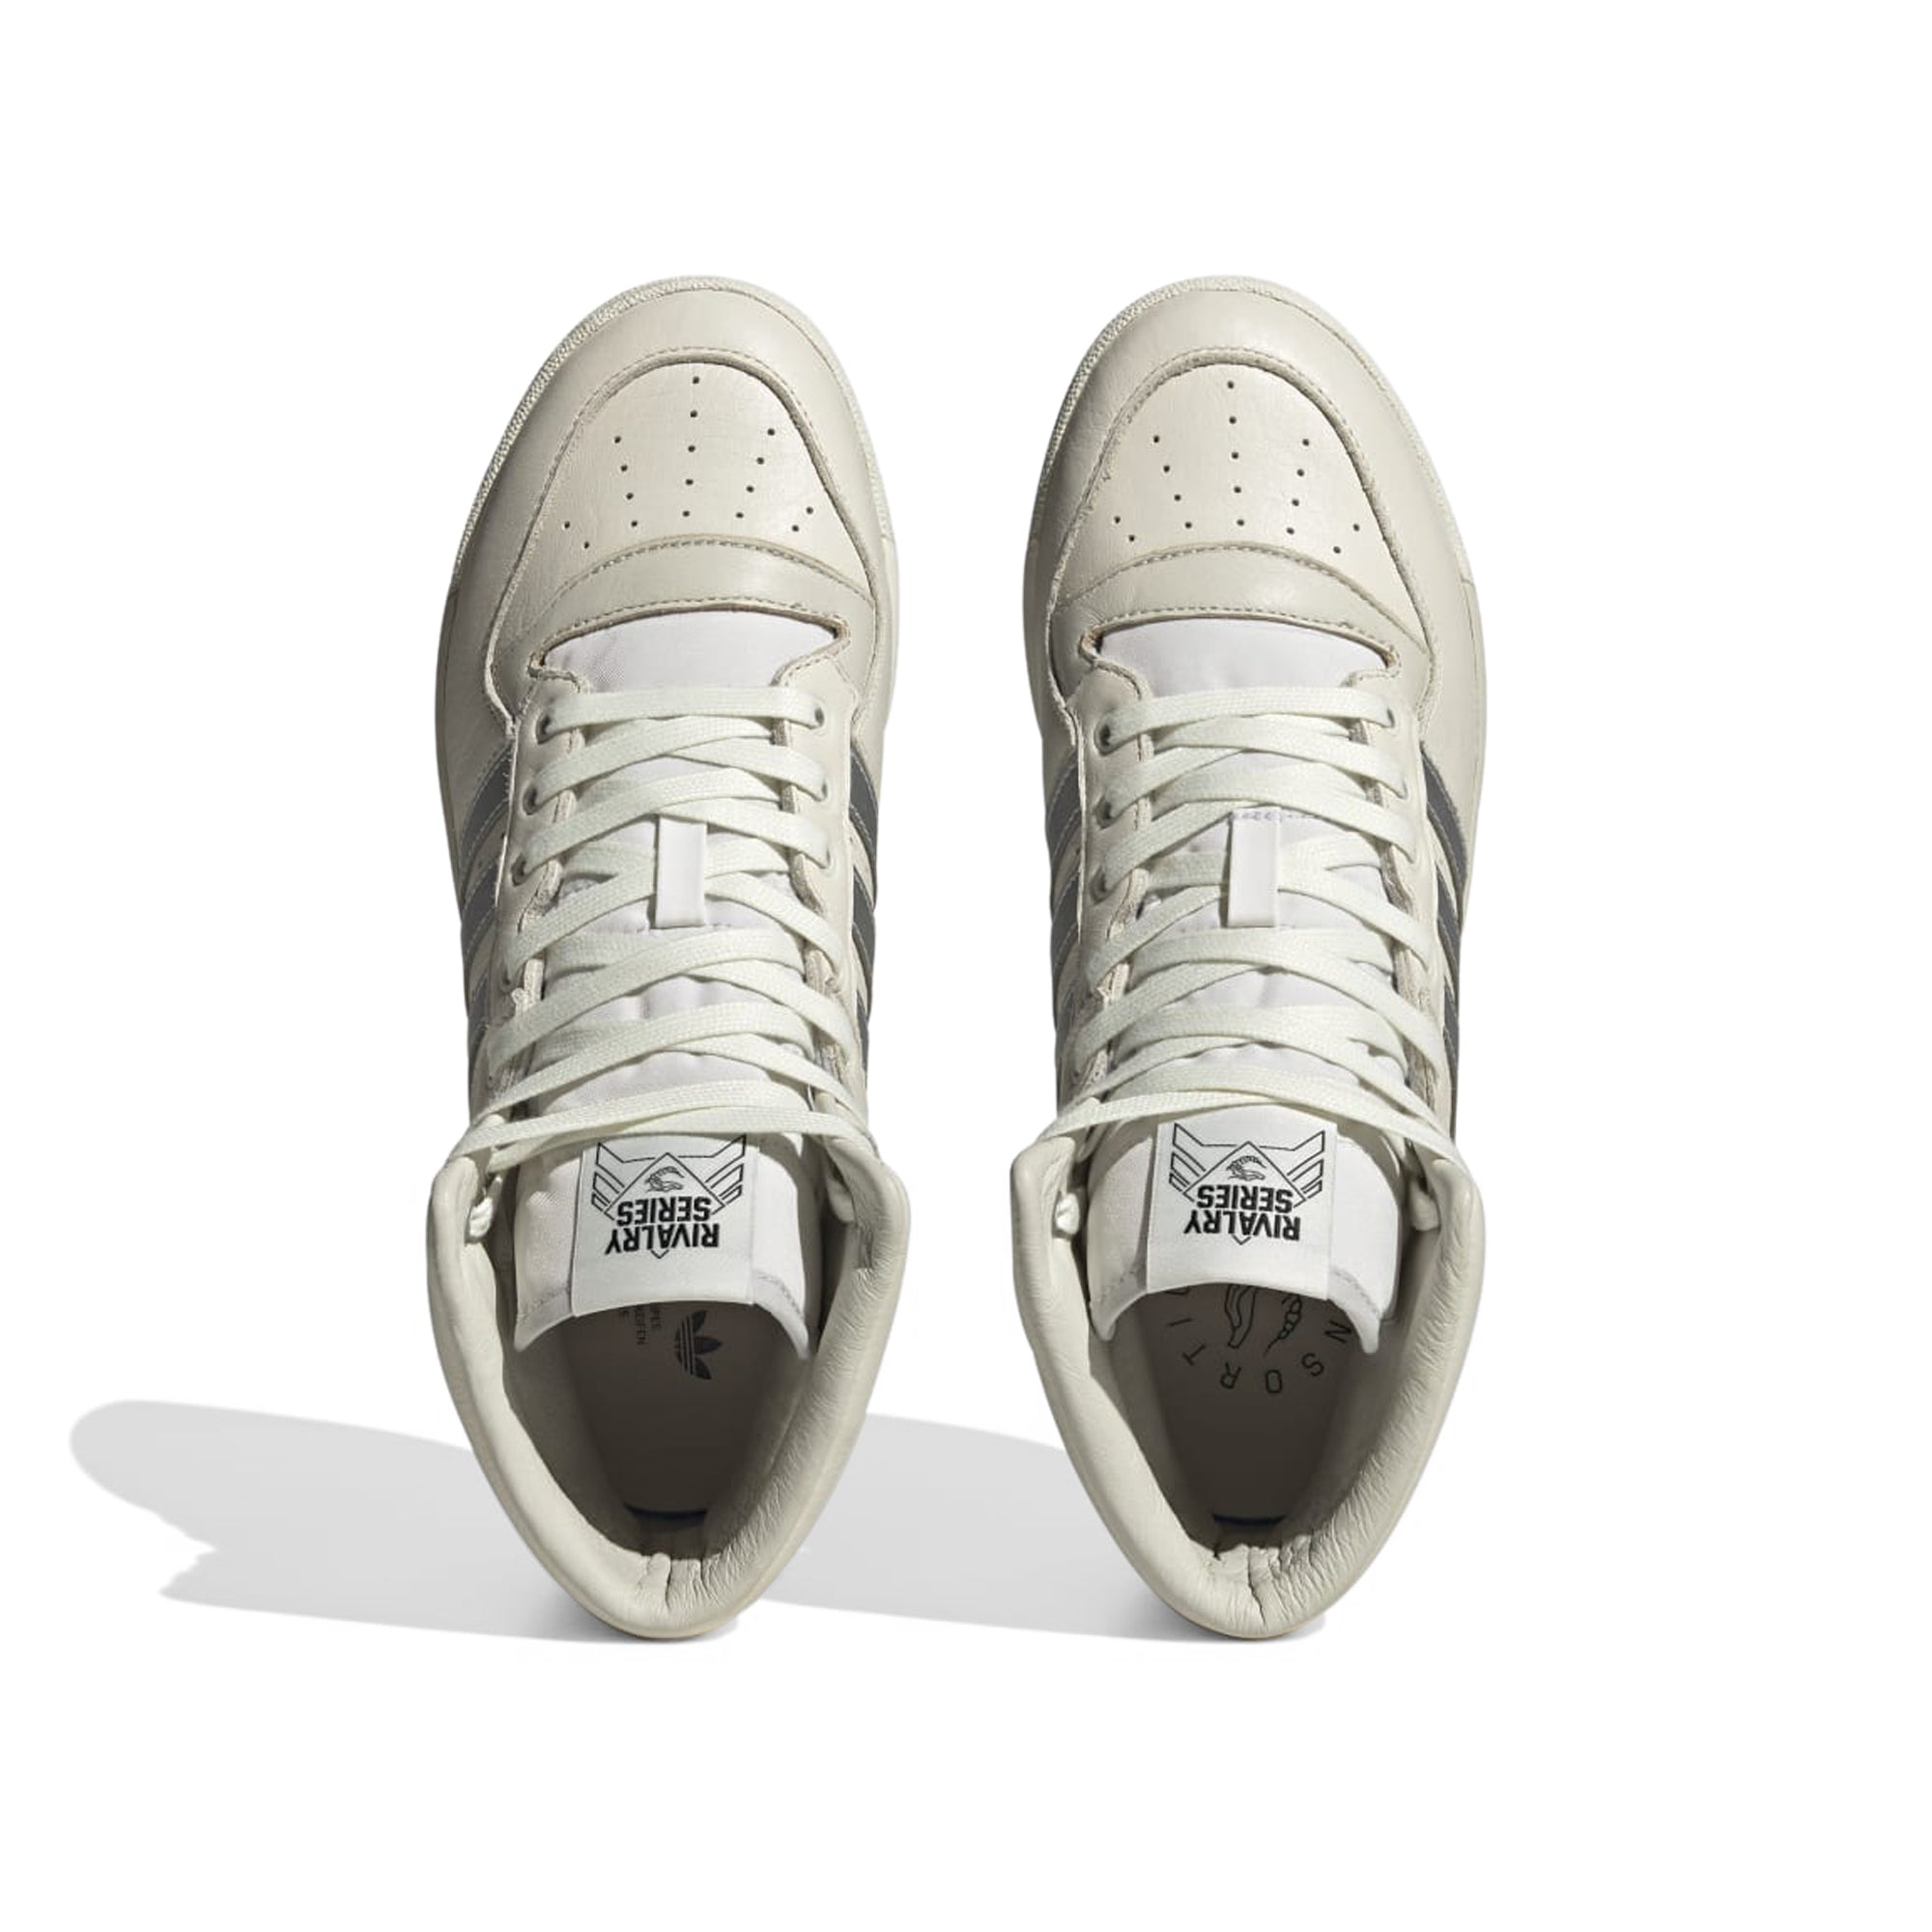 Adidas Rivalry Hi Consortium Shoes – Extra Butter